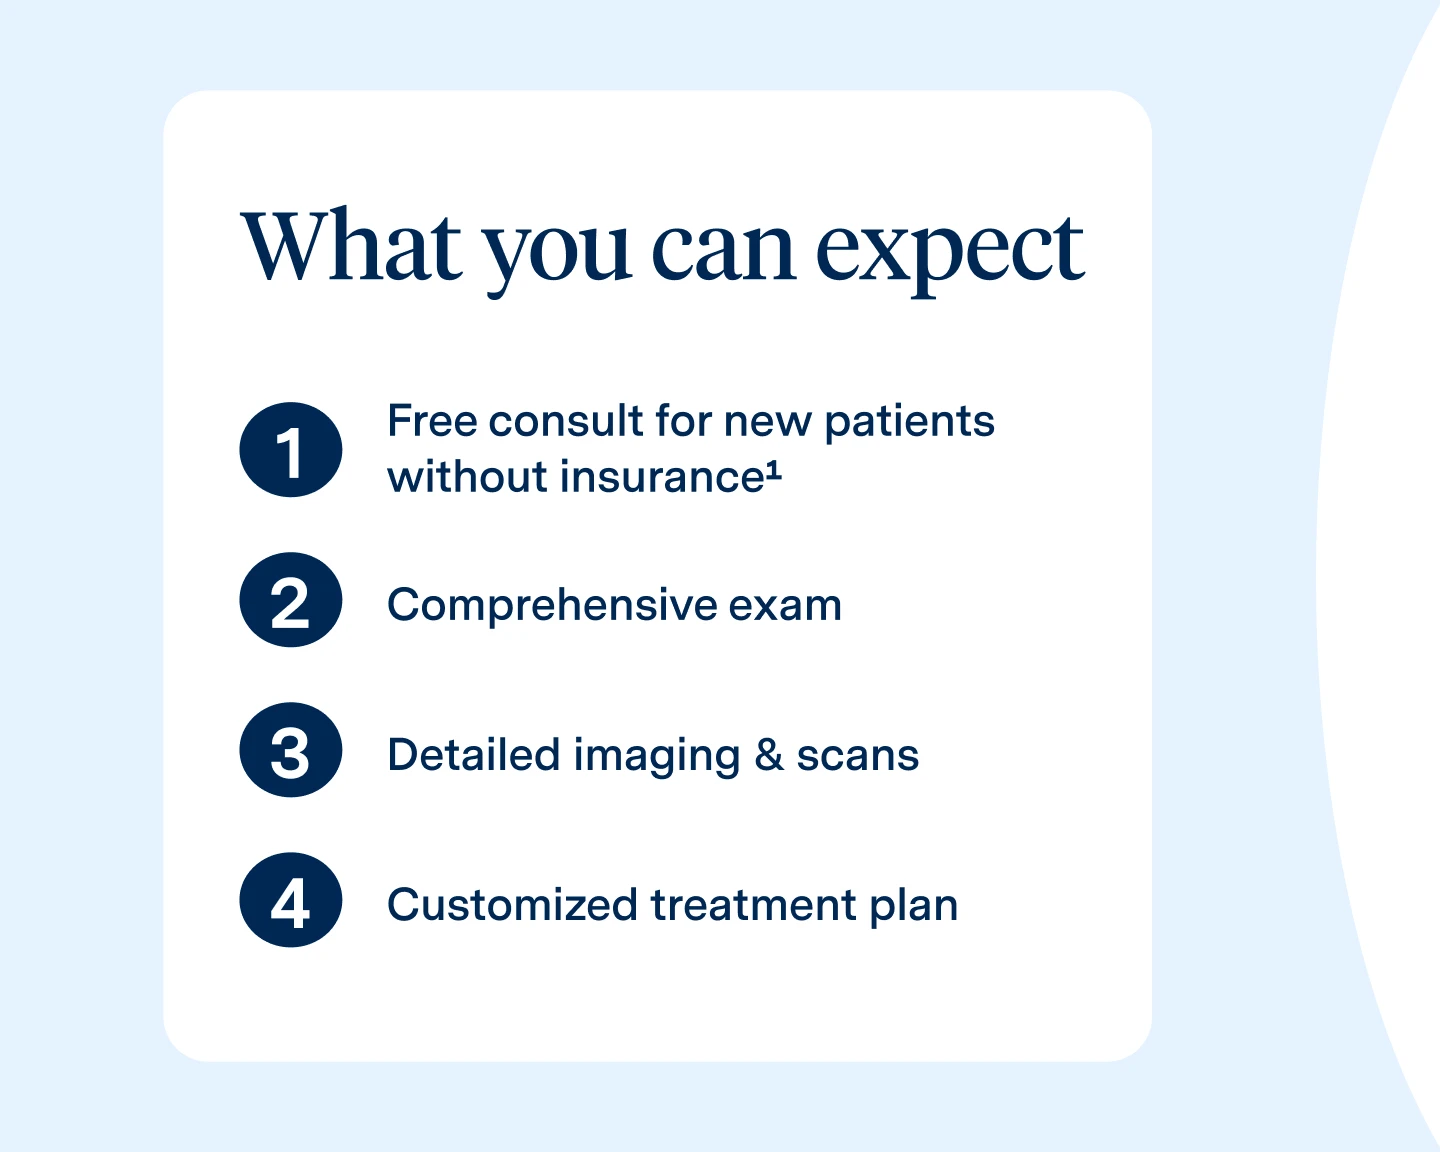  Info card with What you can expect including free consult, exam, scans, and treatment plan.